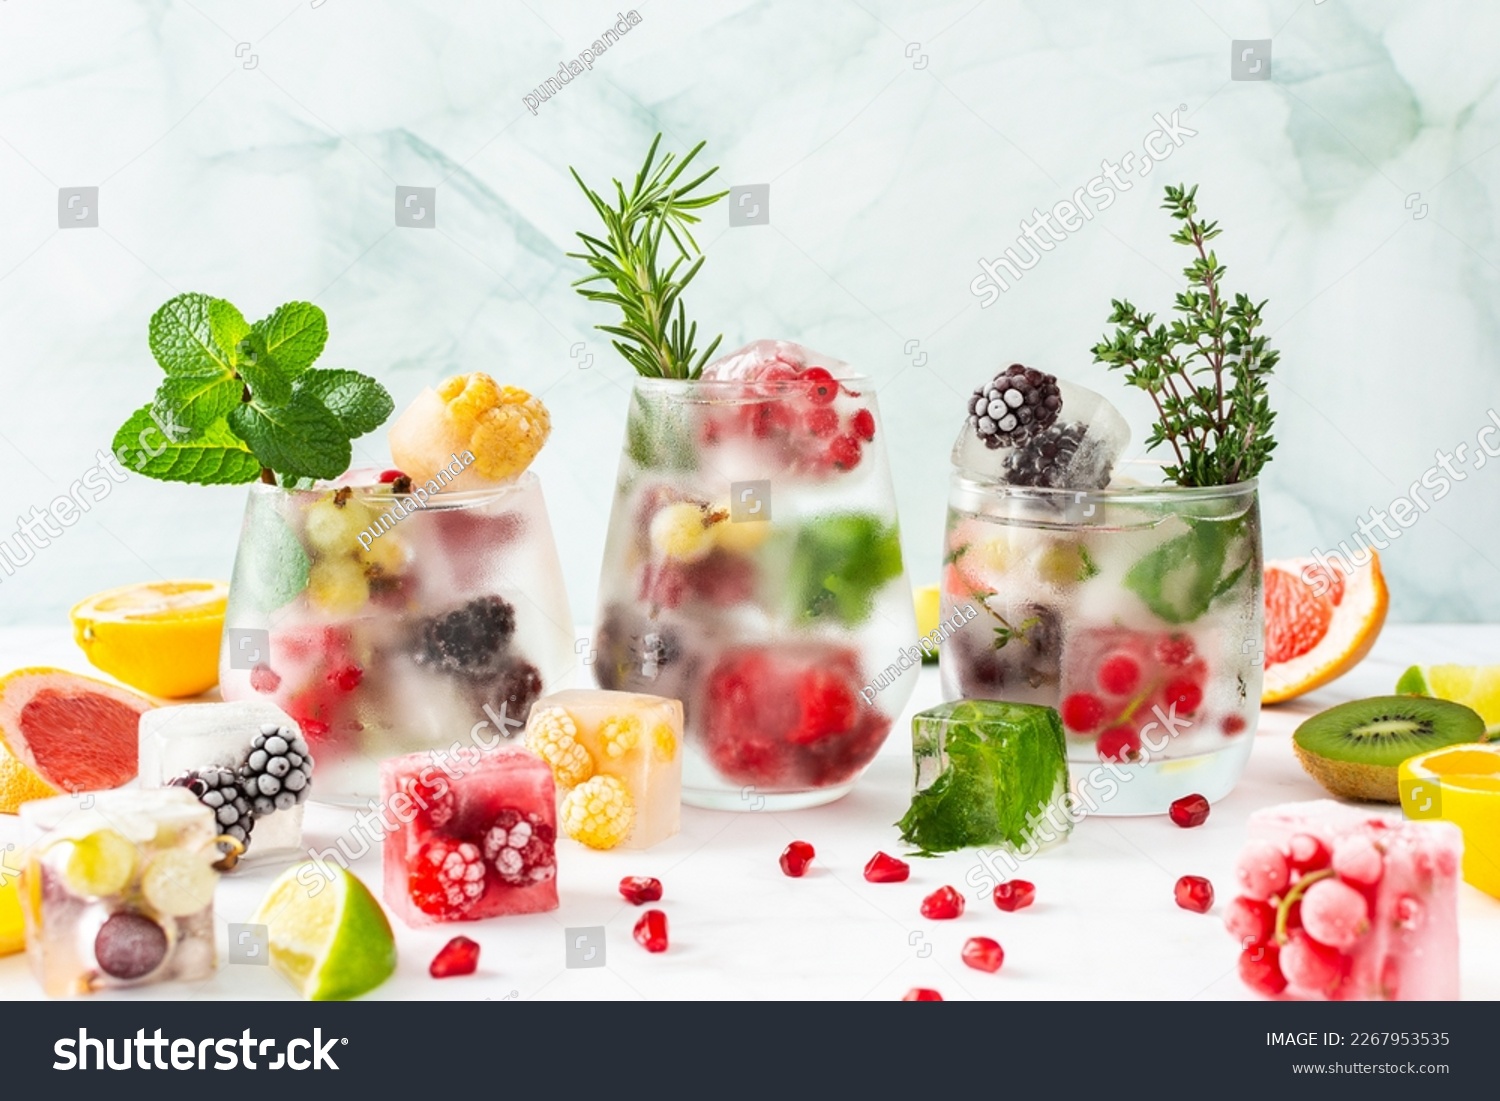 Refreshing drinks with ice cubes with fruits and citrus fruits, ice with blackberries and raspberries, gooseberries and currants, with mint, a jug of water and citrus fruits #2267953535